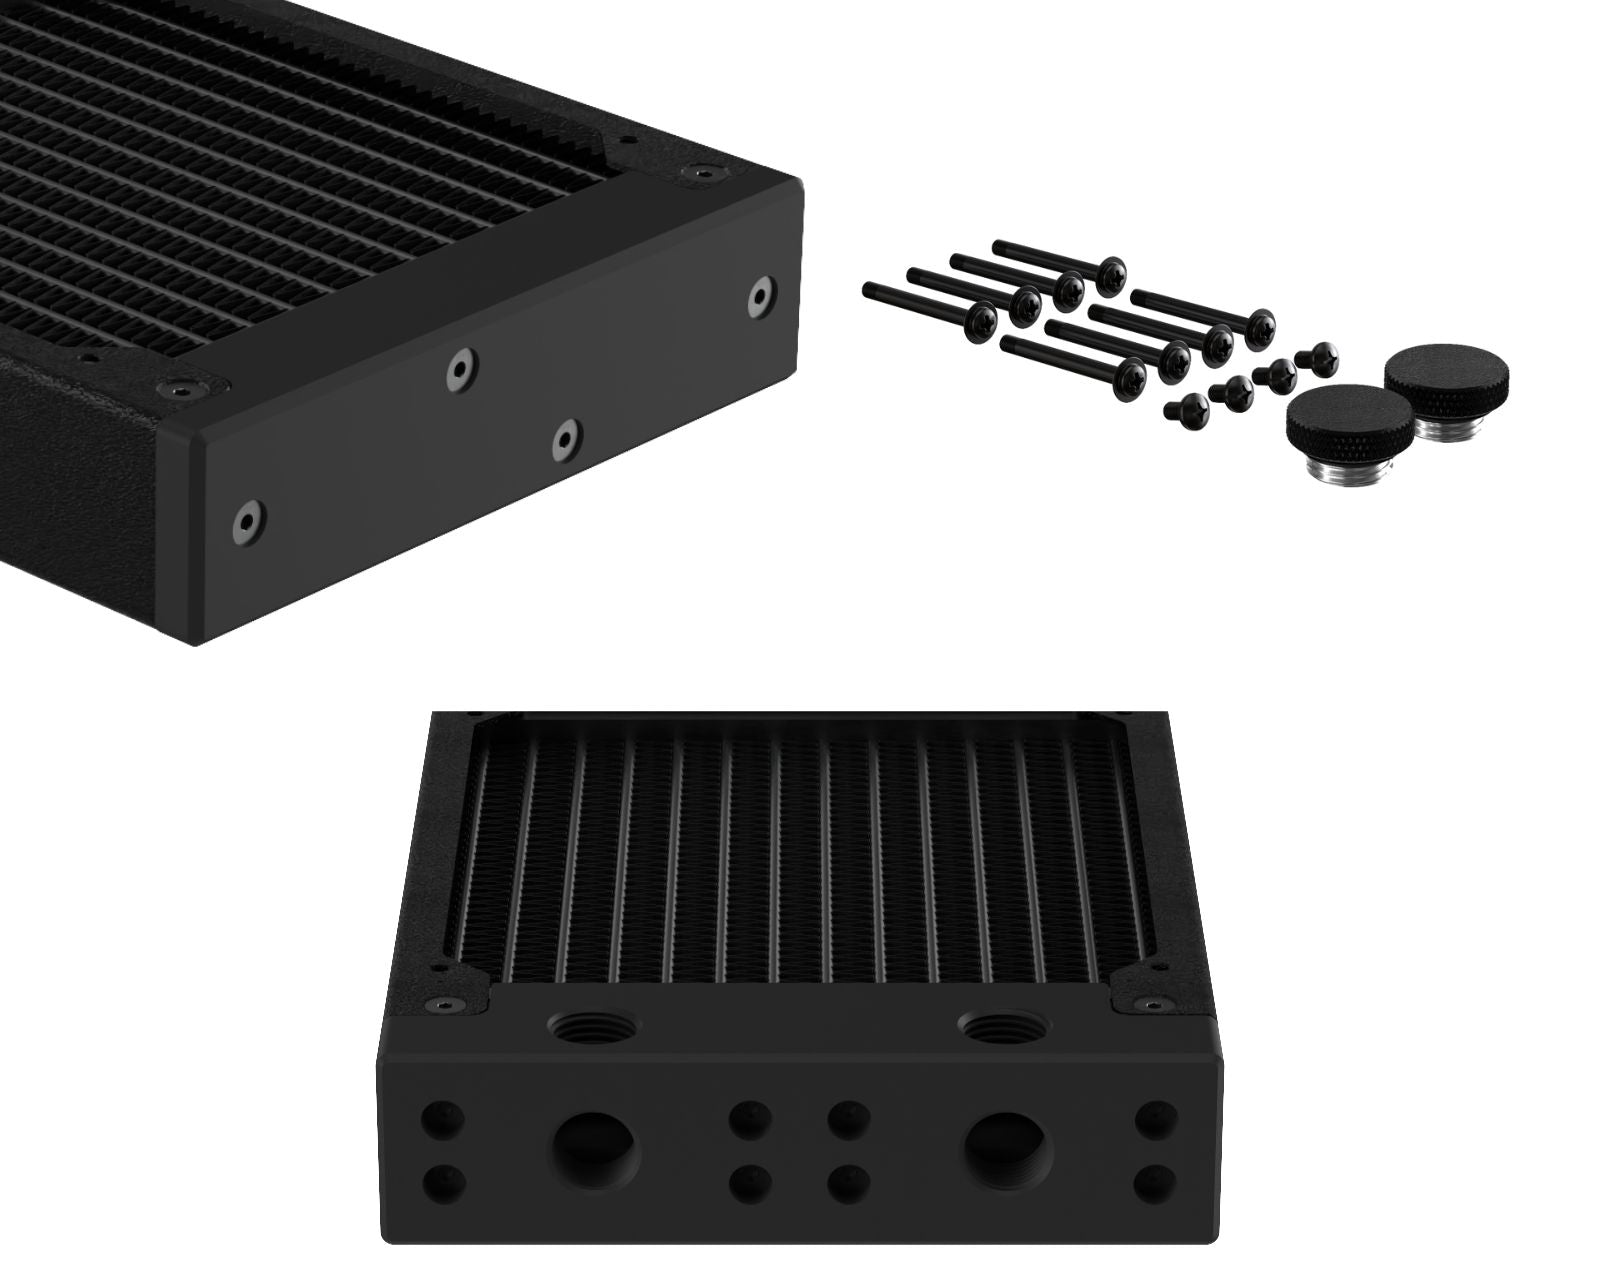 PrimoChill 240SL (30mm) EXIMO Modular Radiator, Black POM, 2x120mm, Dual Fan (R-SL-BK24) Available in 20+ Colors, Assembled in USA and Custom Watercooling Loop Ready - TX Matte Black